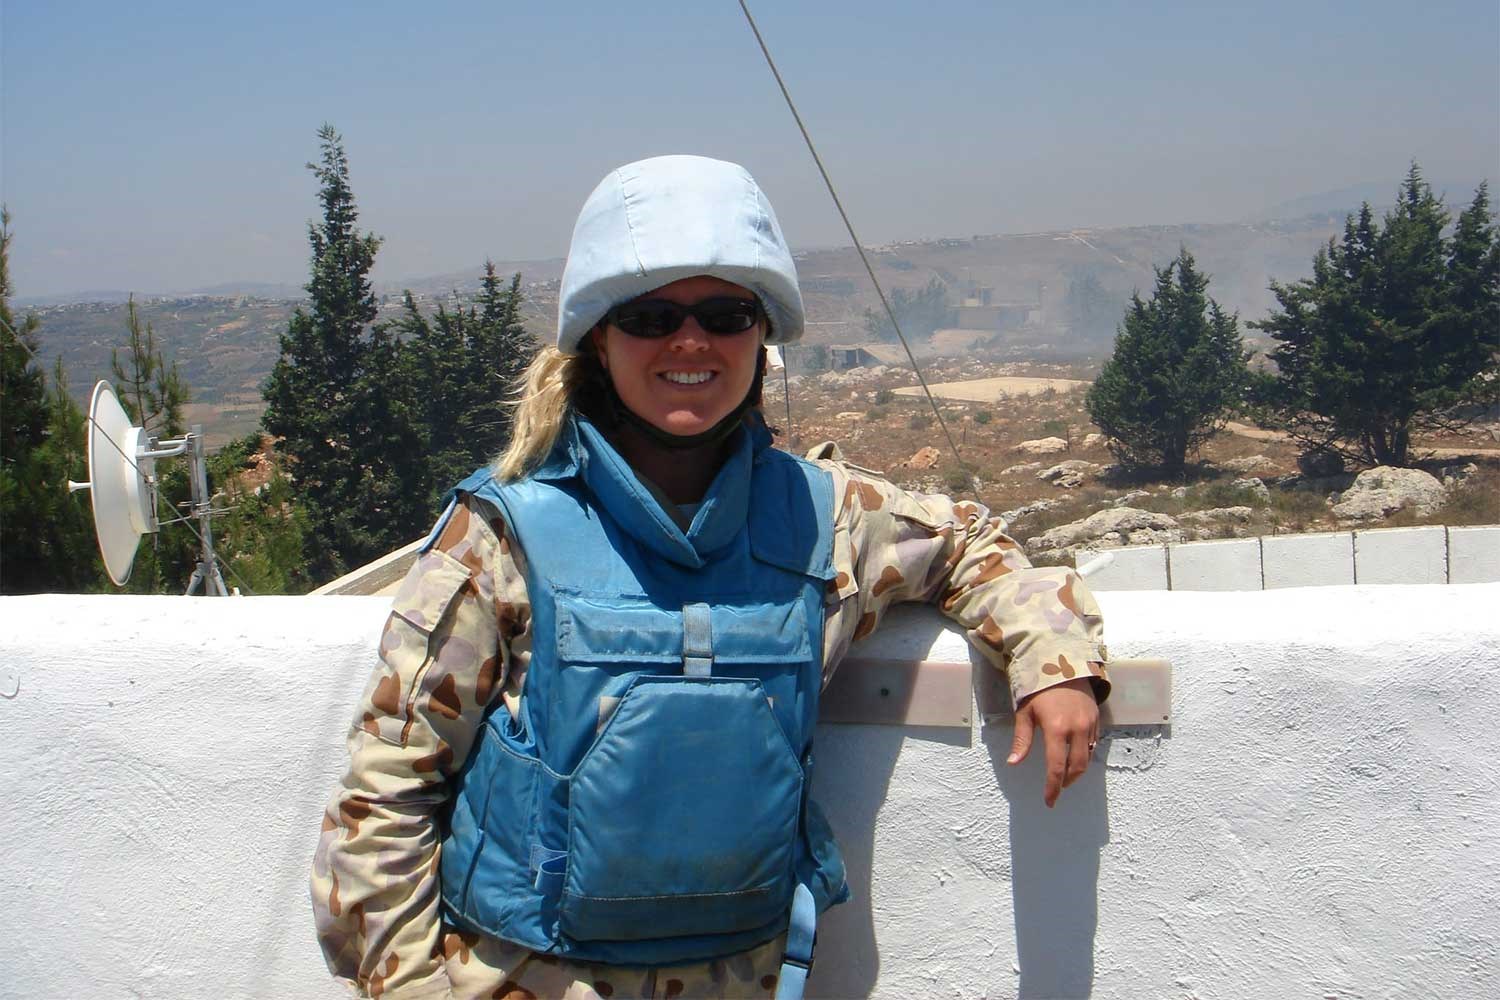 Matina Jewell on the UN peacekeeping mission